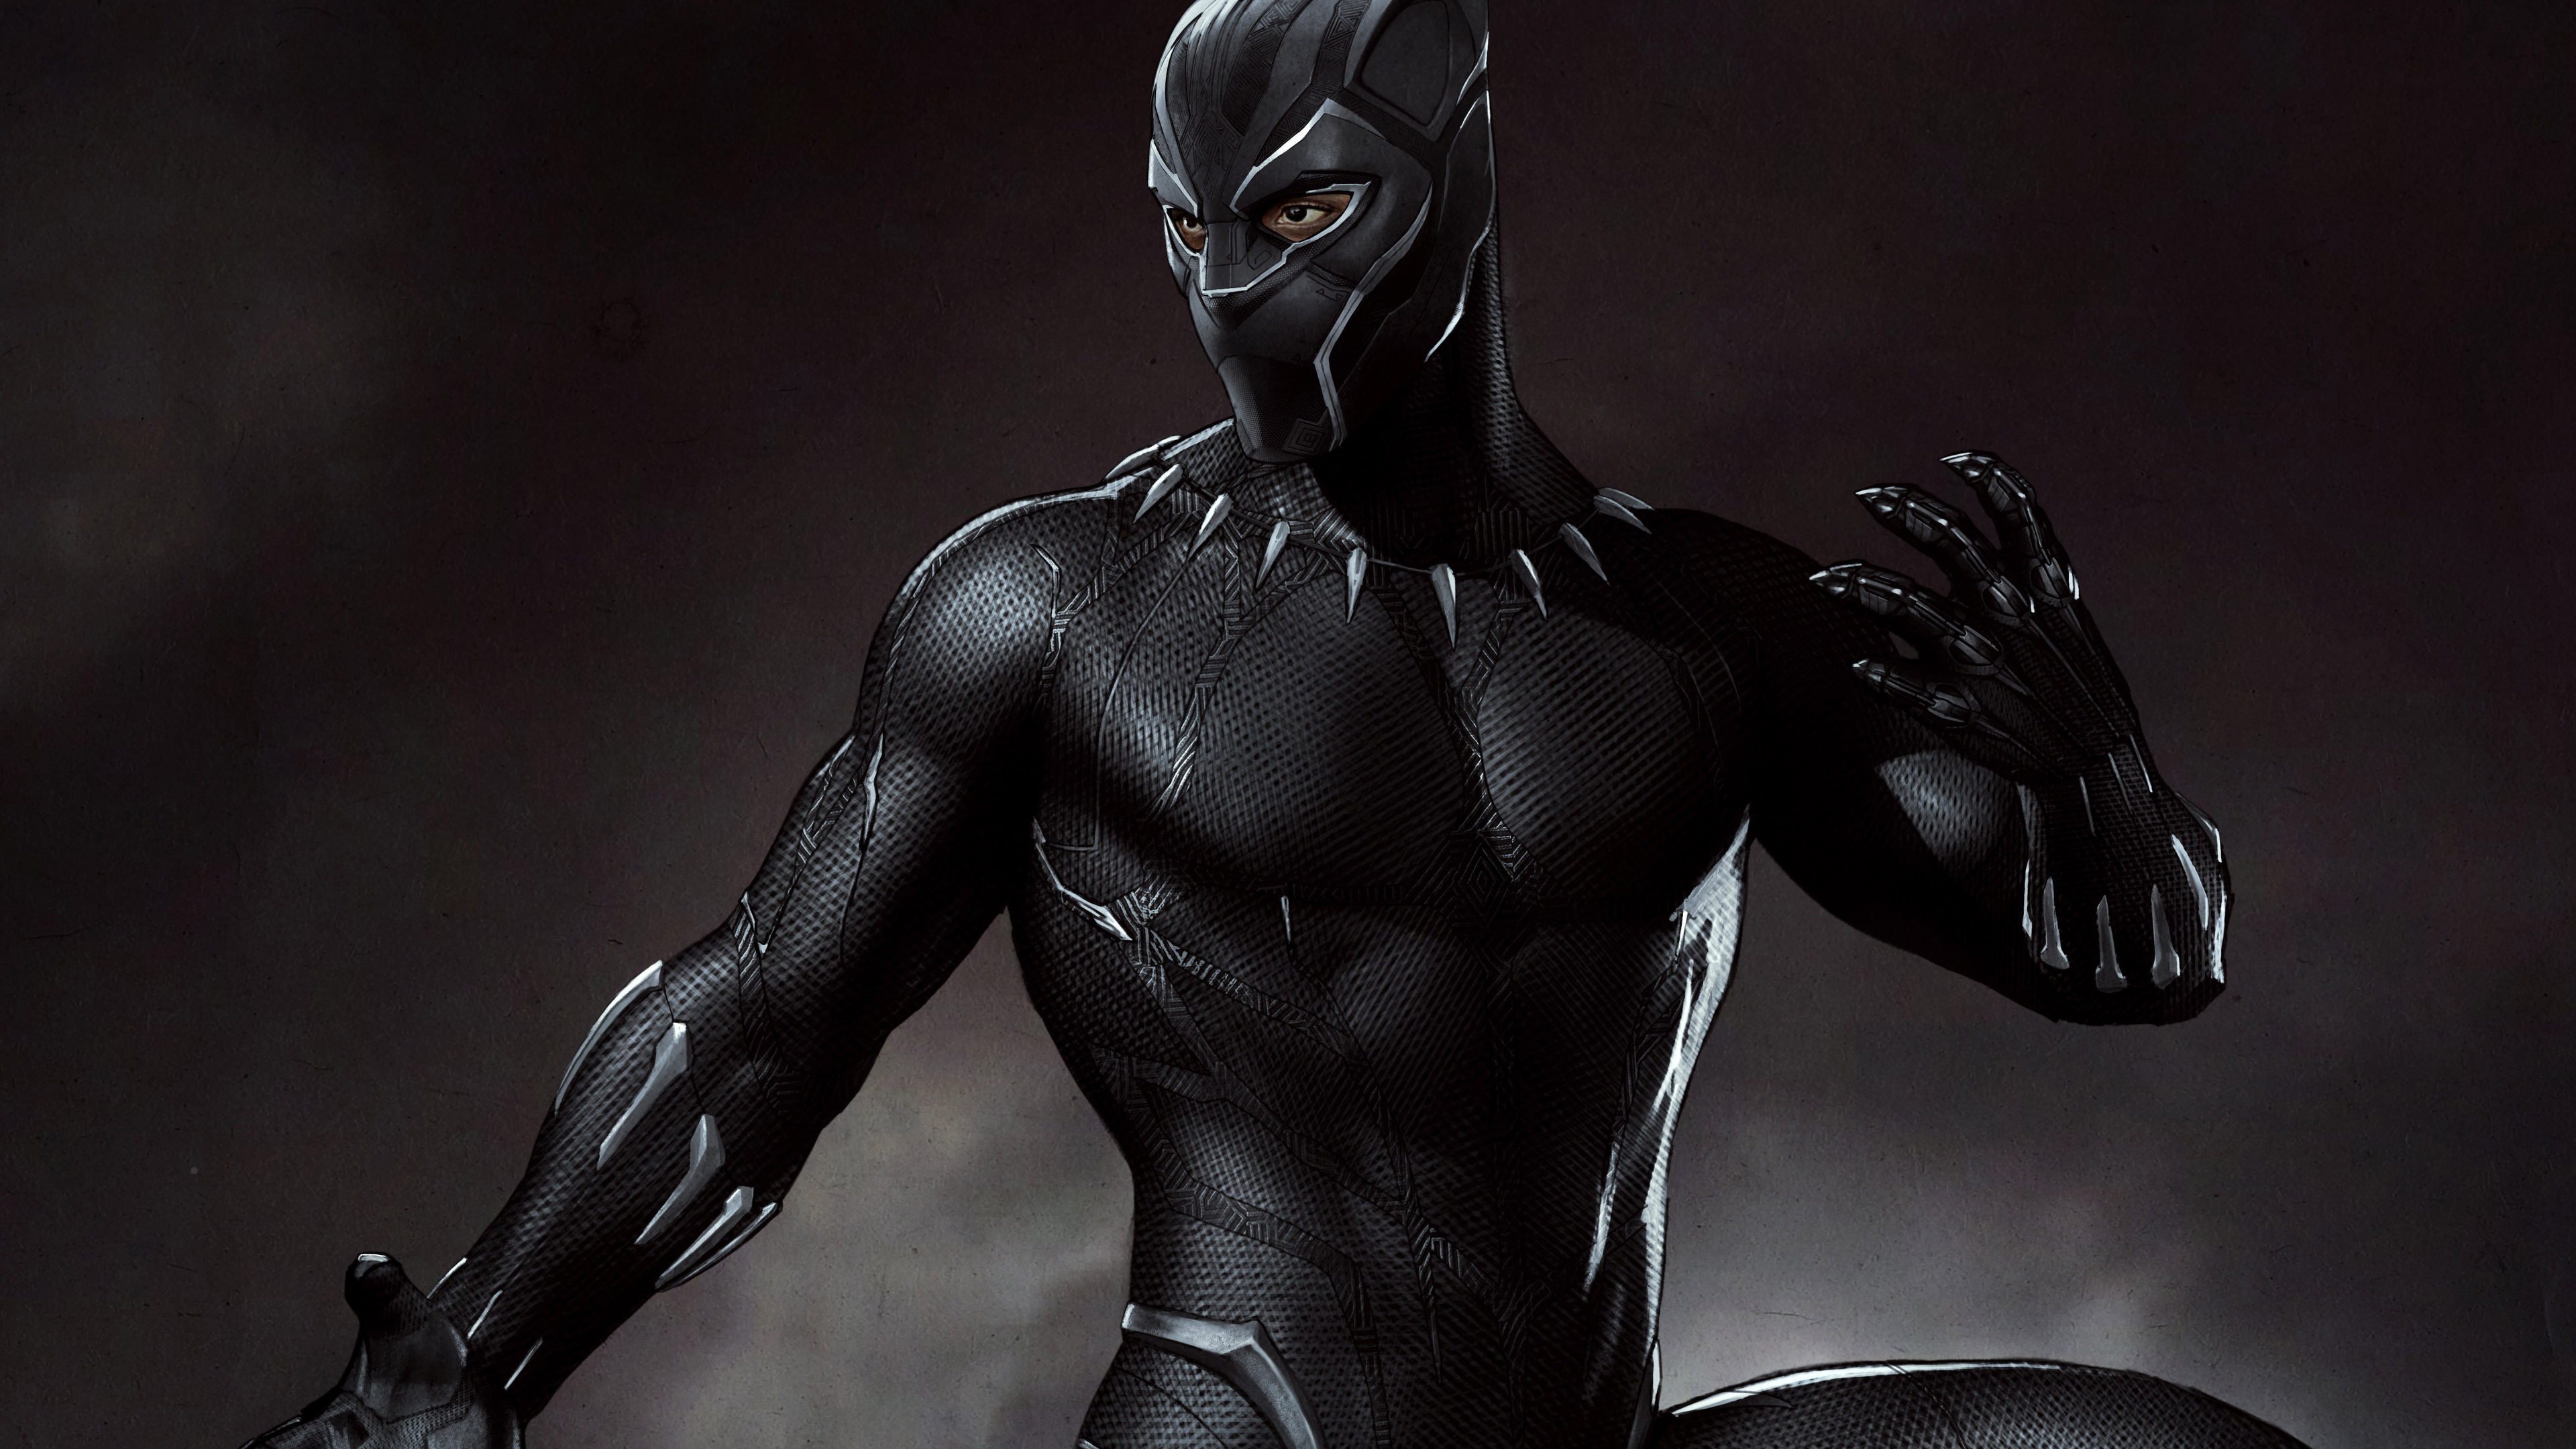 3840x2160 Black Panther 5k Artwork 4k HD 4k Wallpapers, Images, Backgrounds, Photos and Pictures